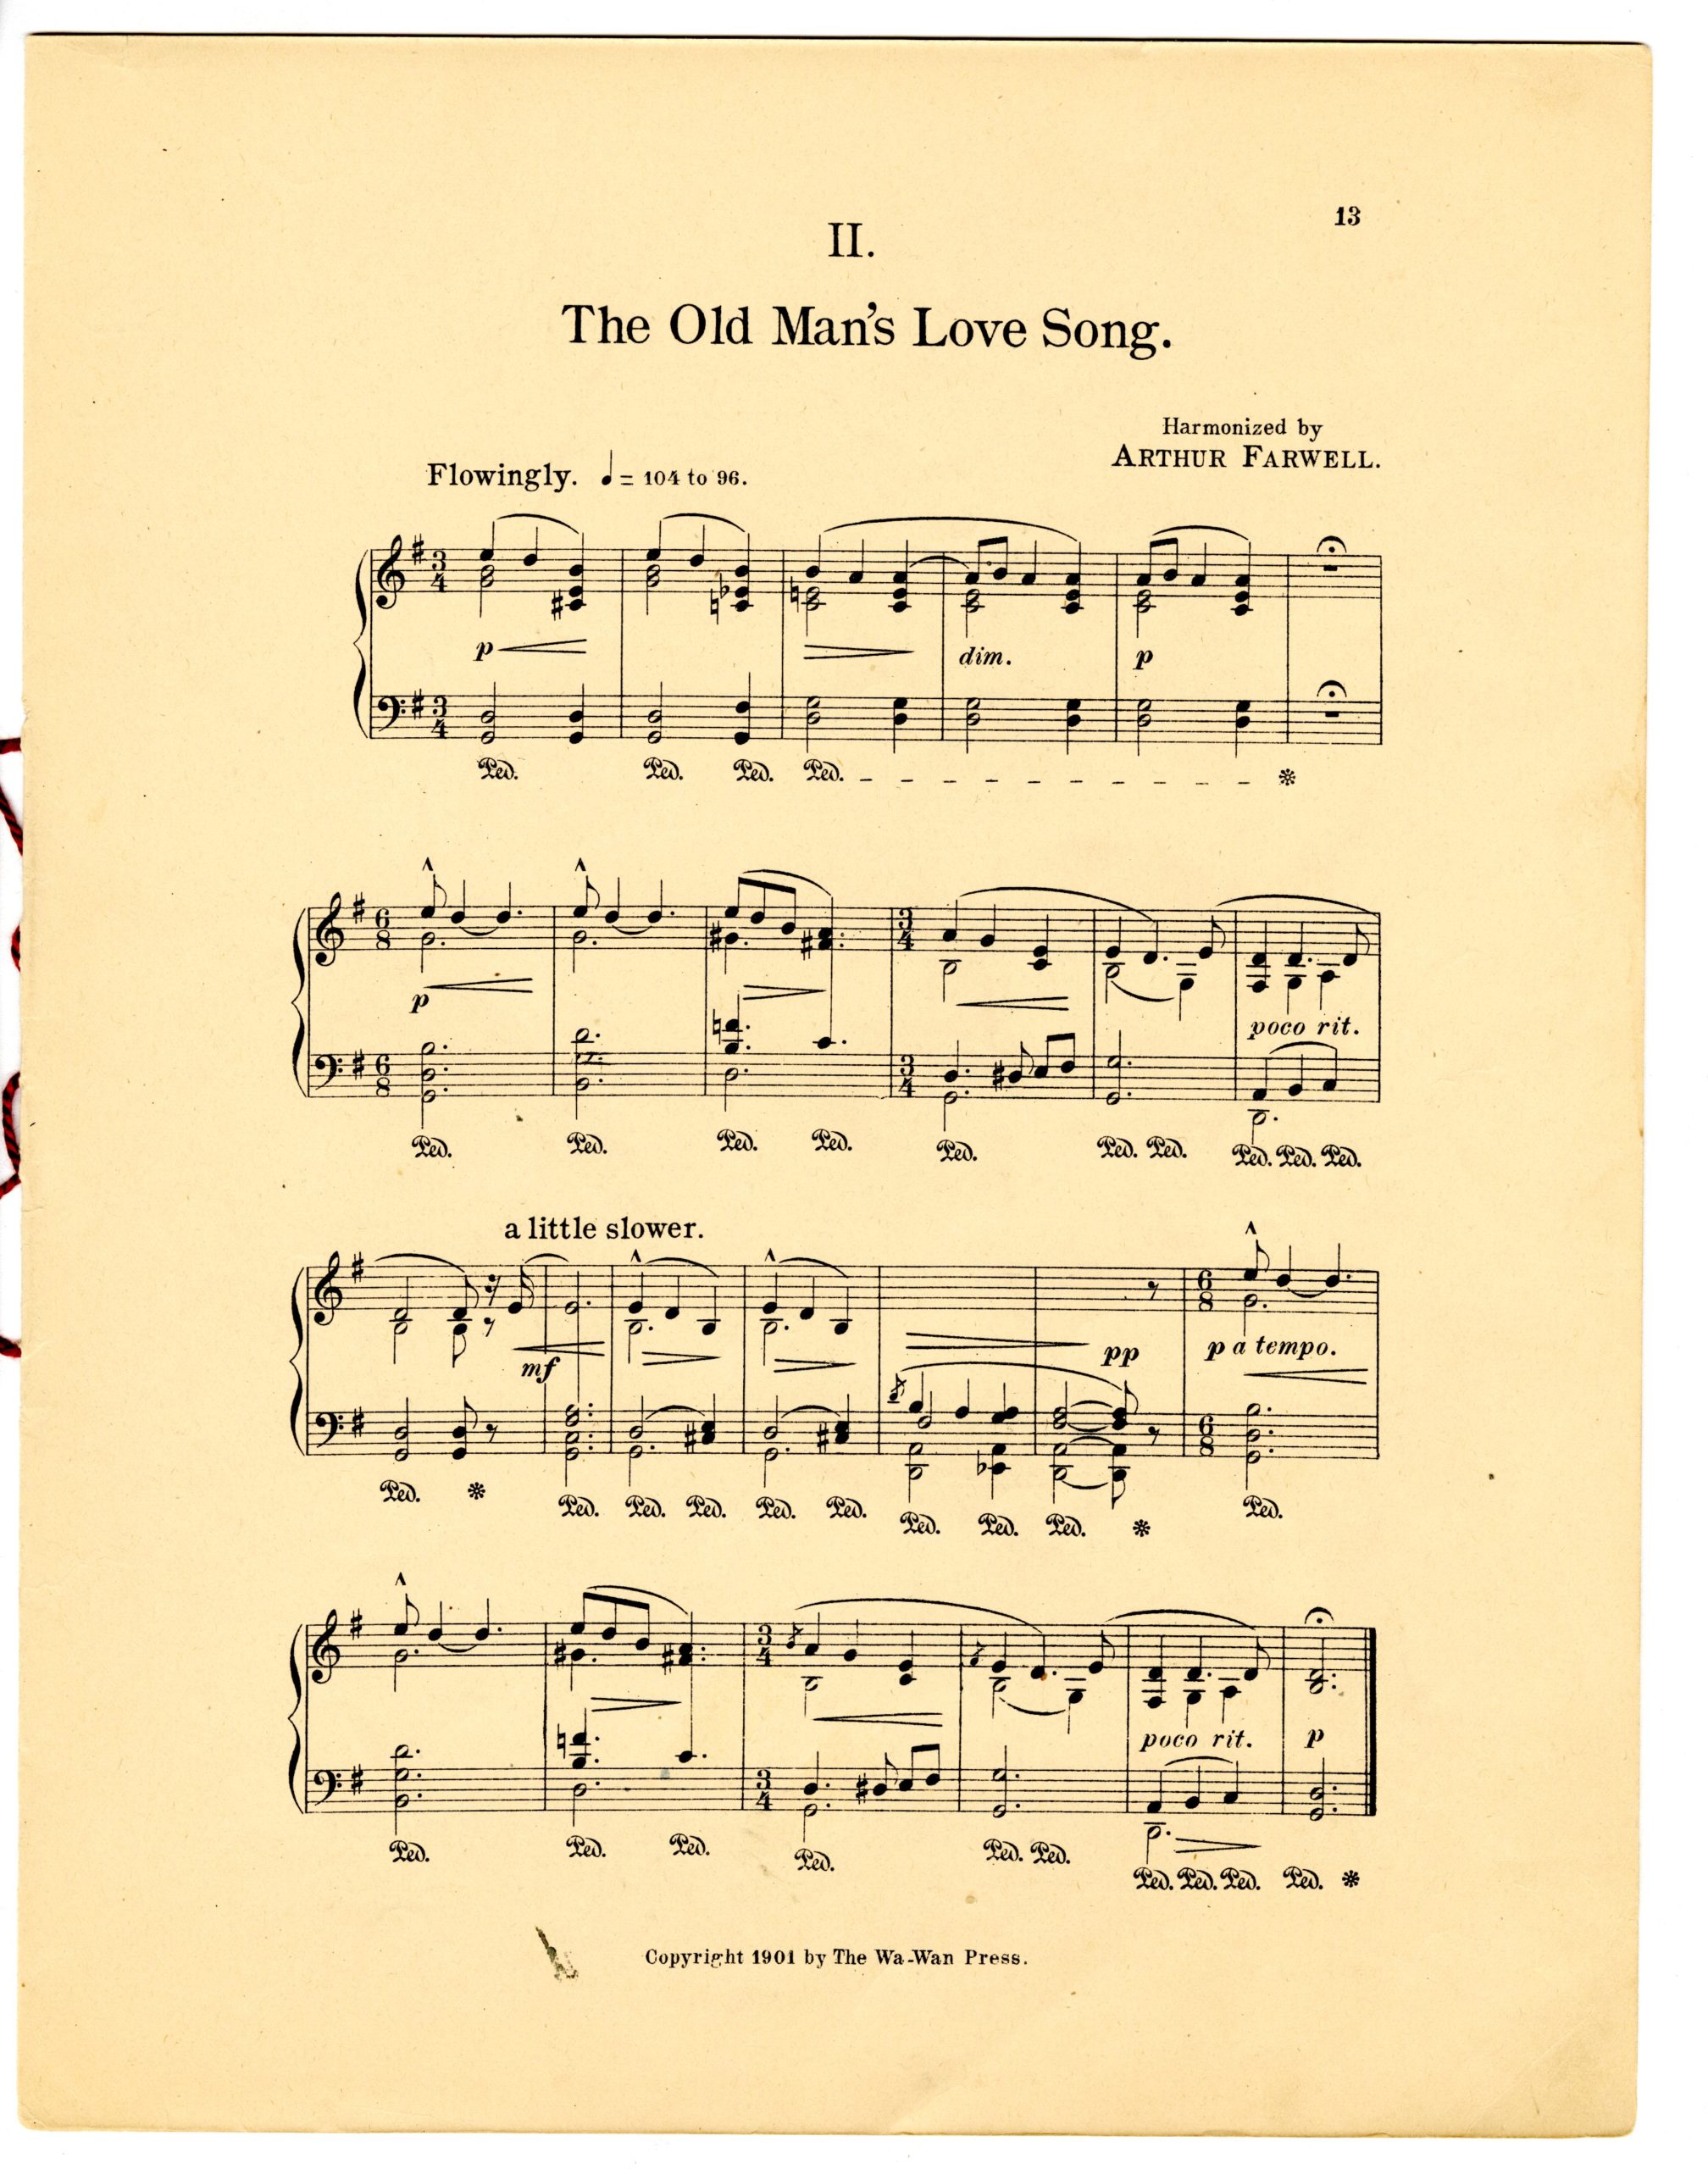 The Old Man’s Love Song score.